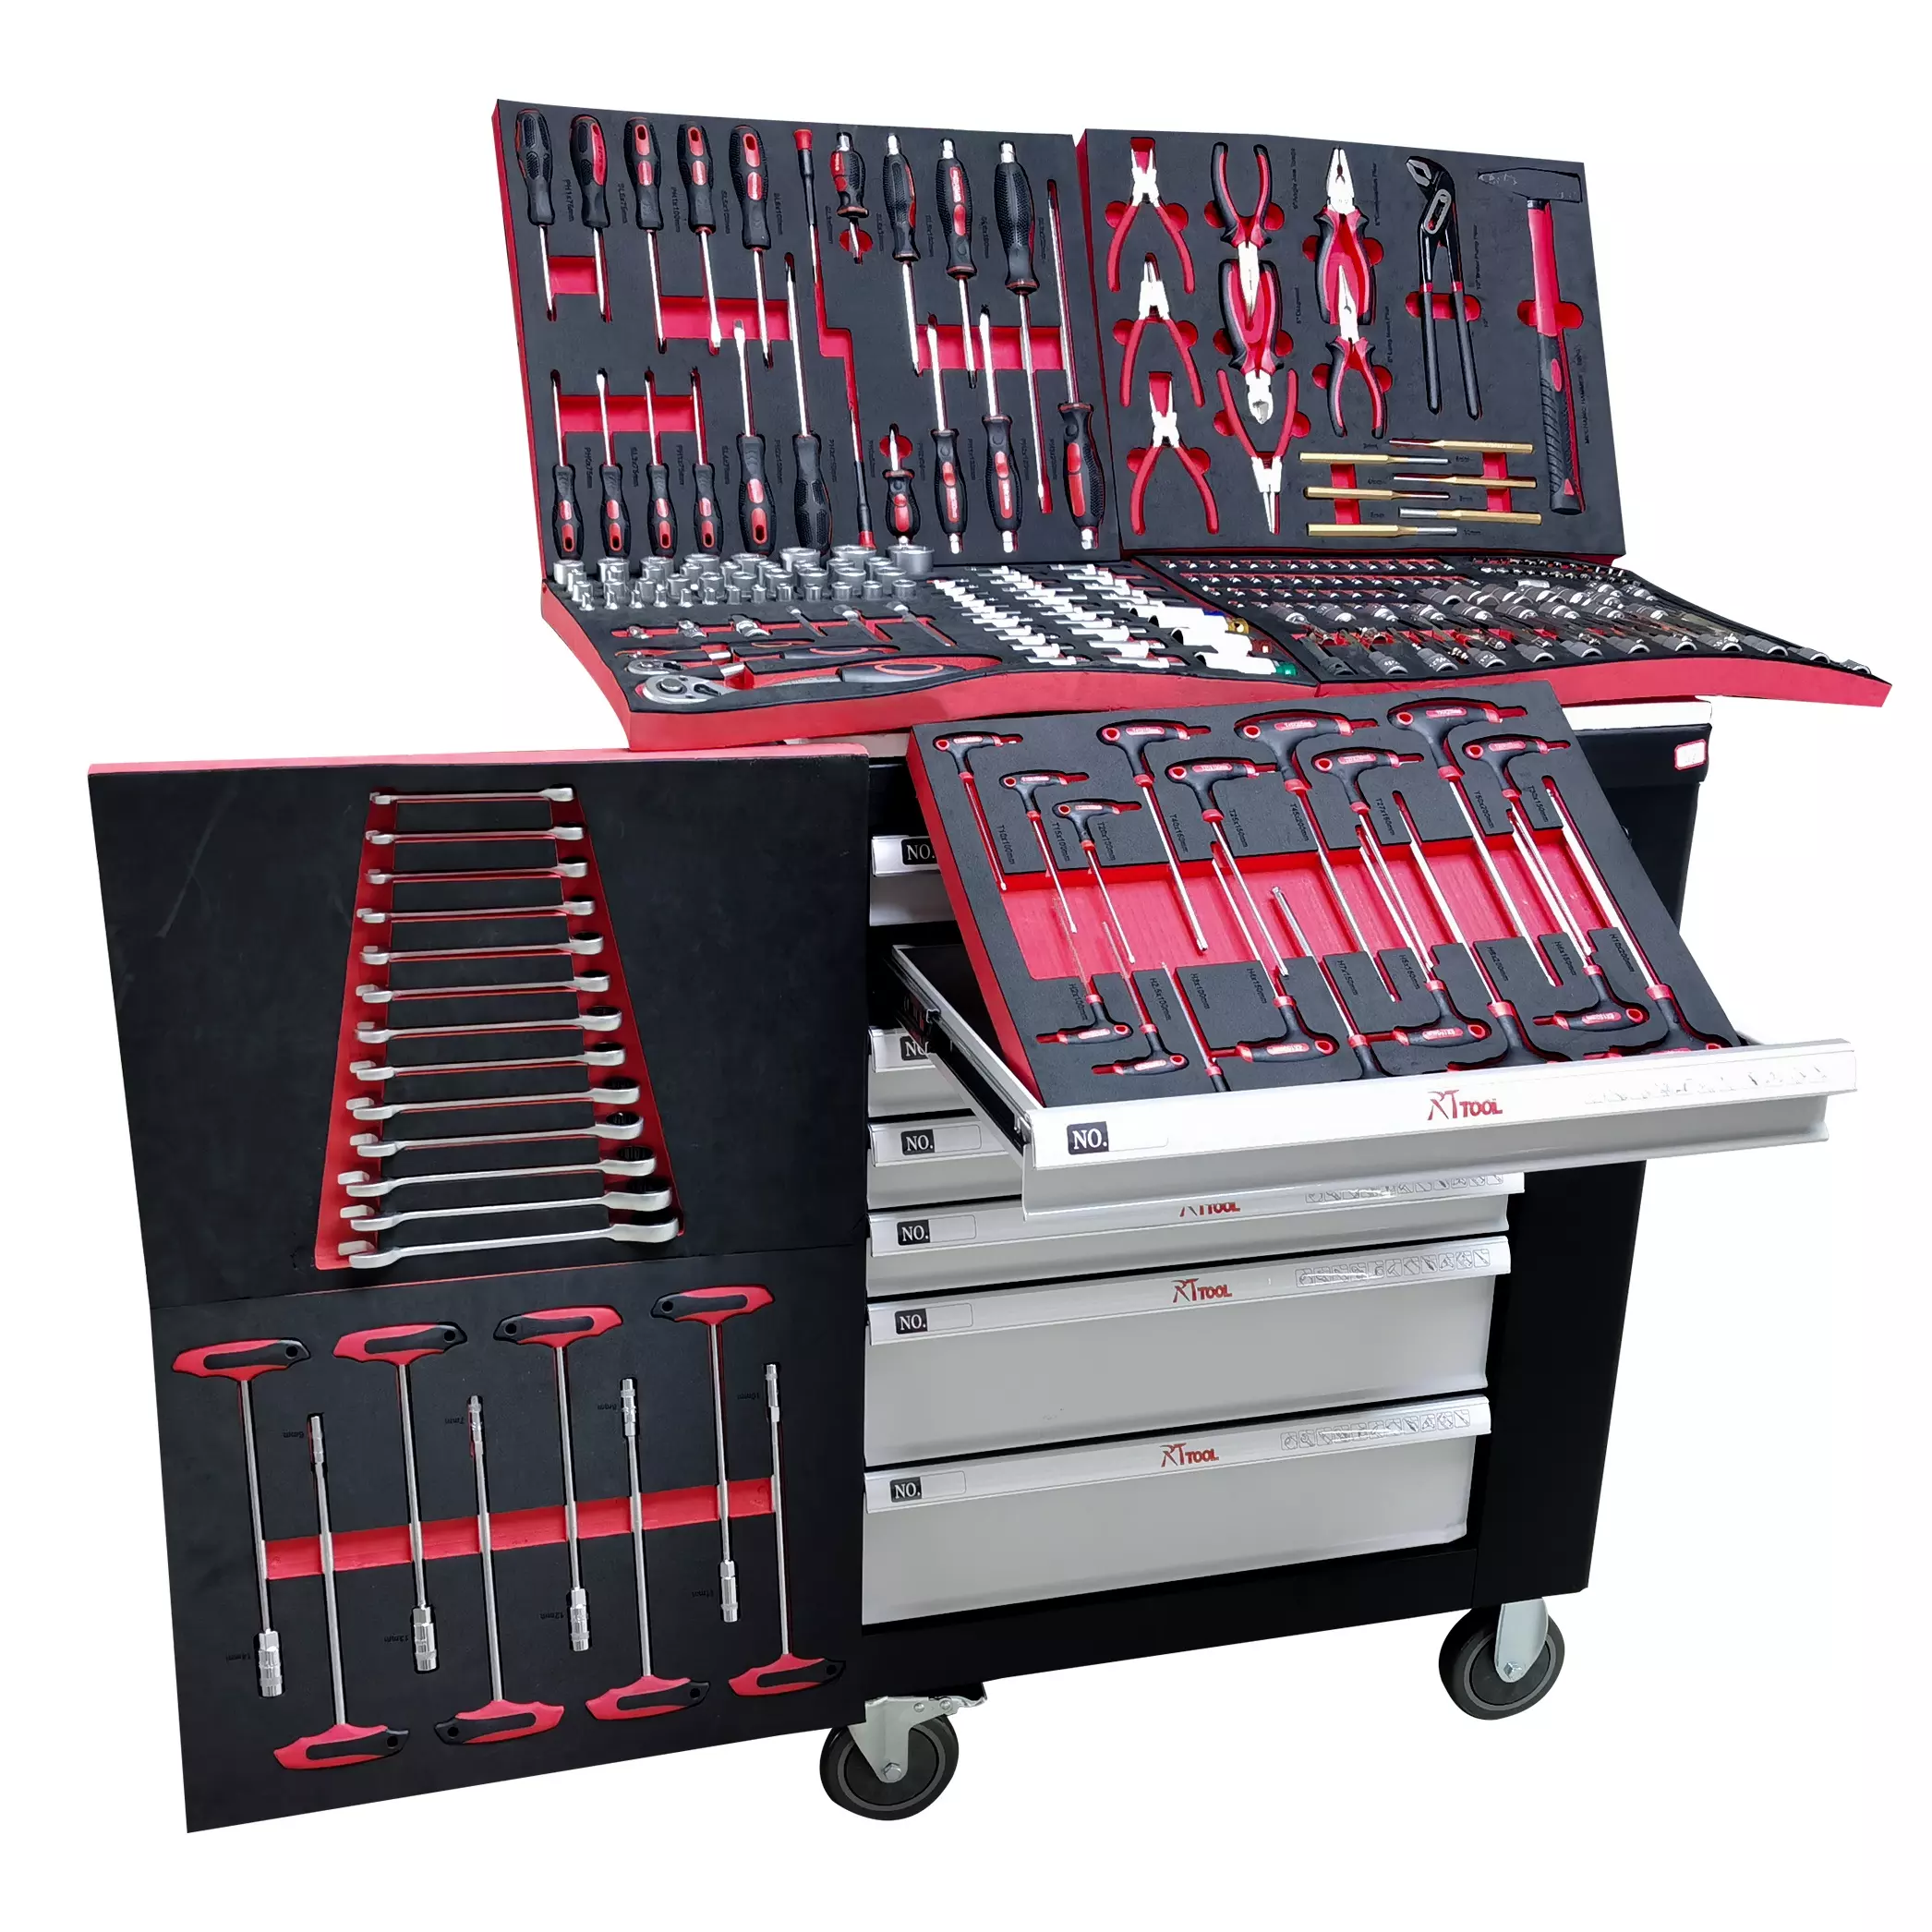 Automobile Garage Tools and Equipments